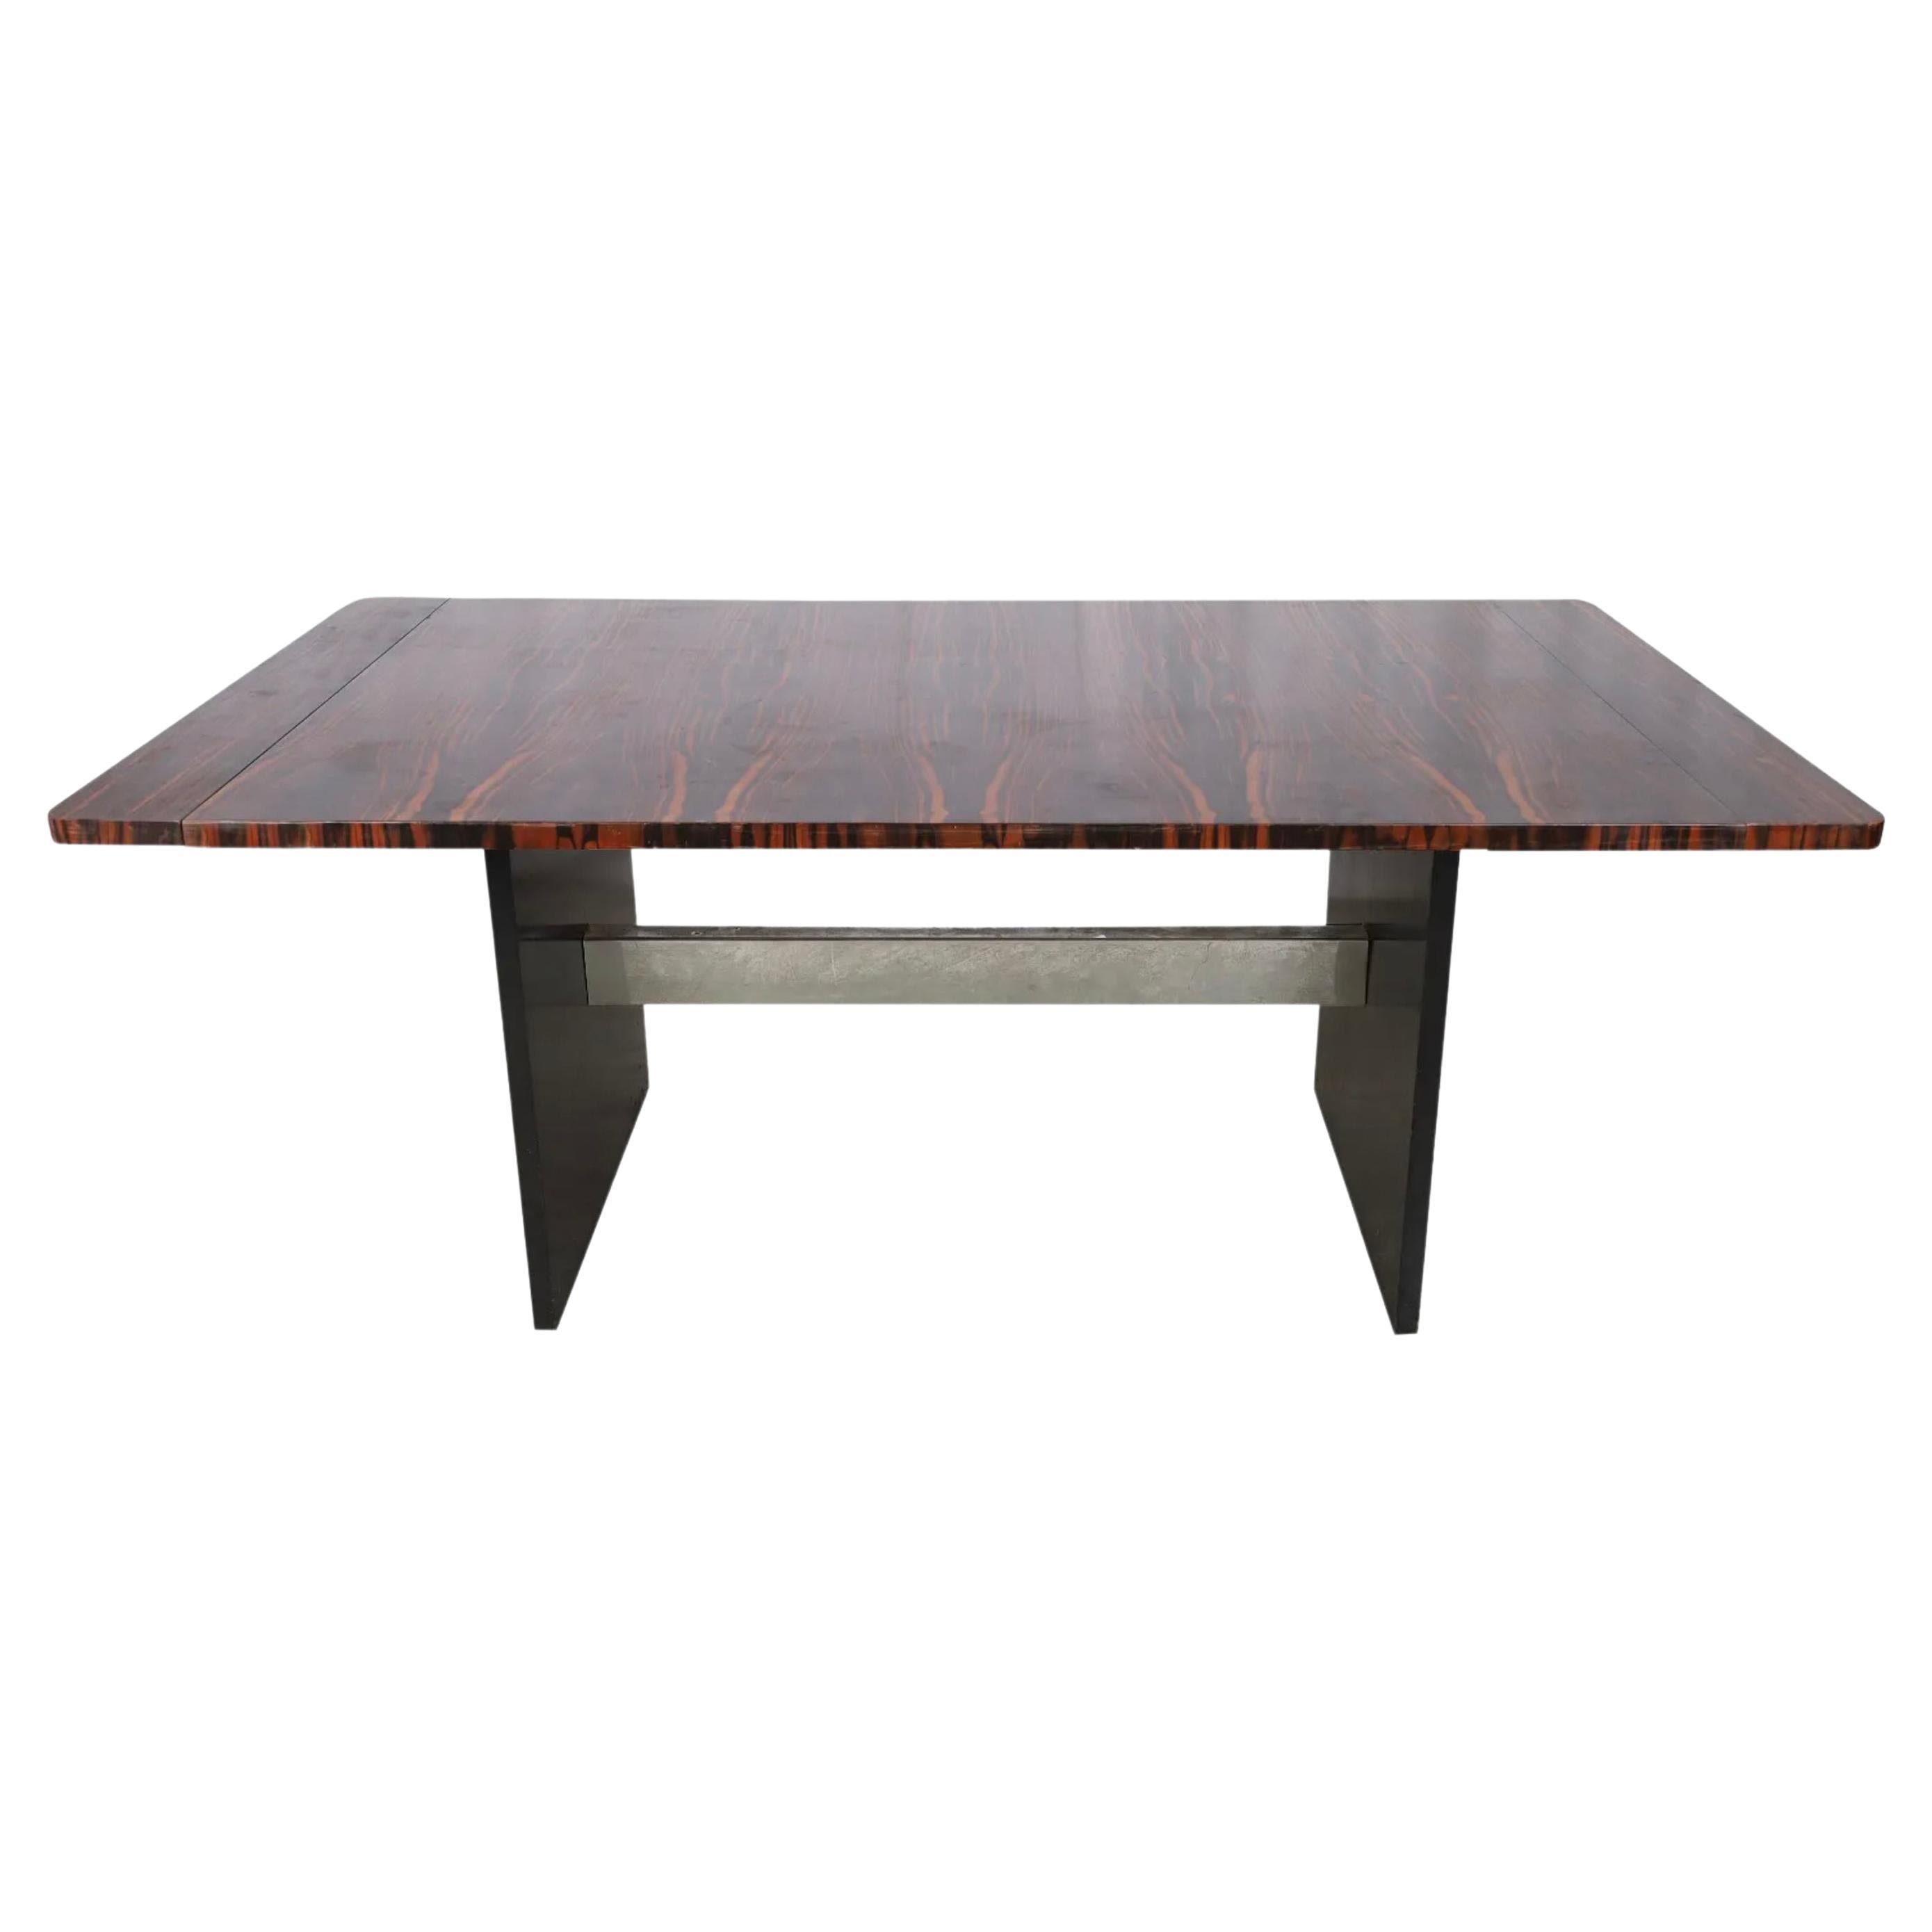 Superb Midcentury Brazilian Rosewood Modern Extension Dining Table 2 Leaves